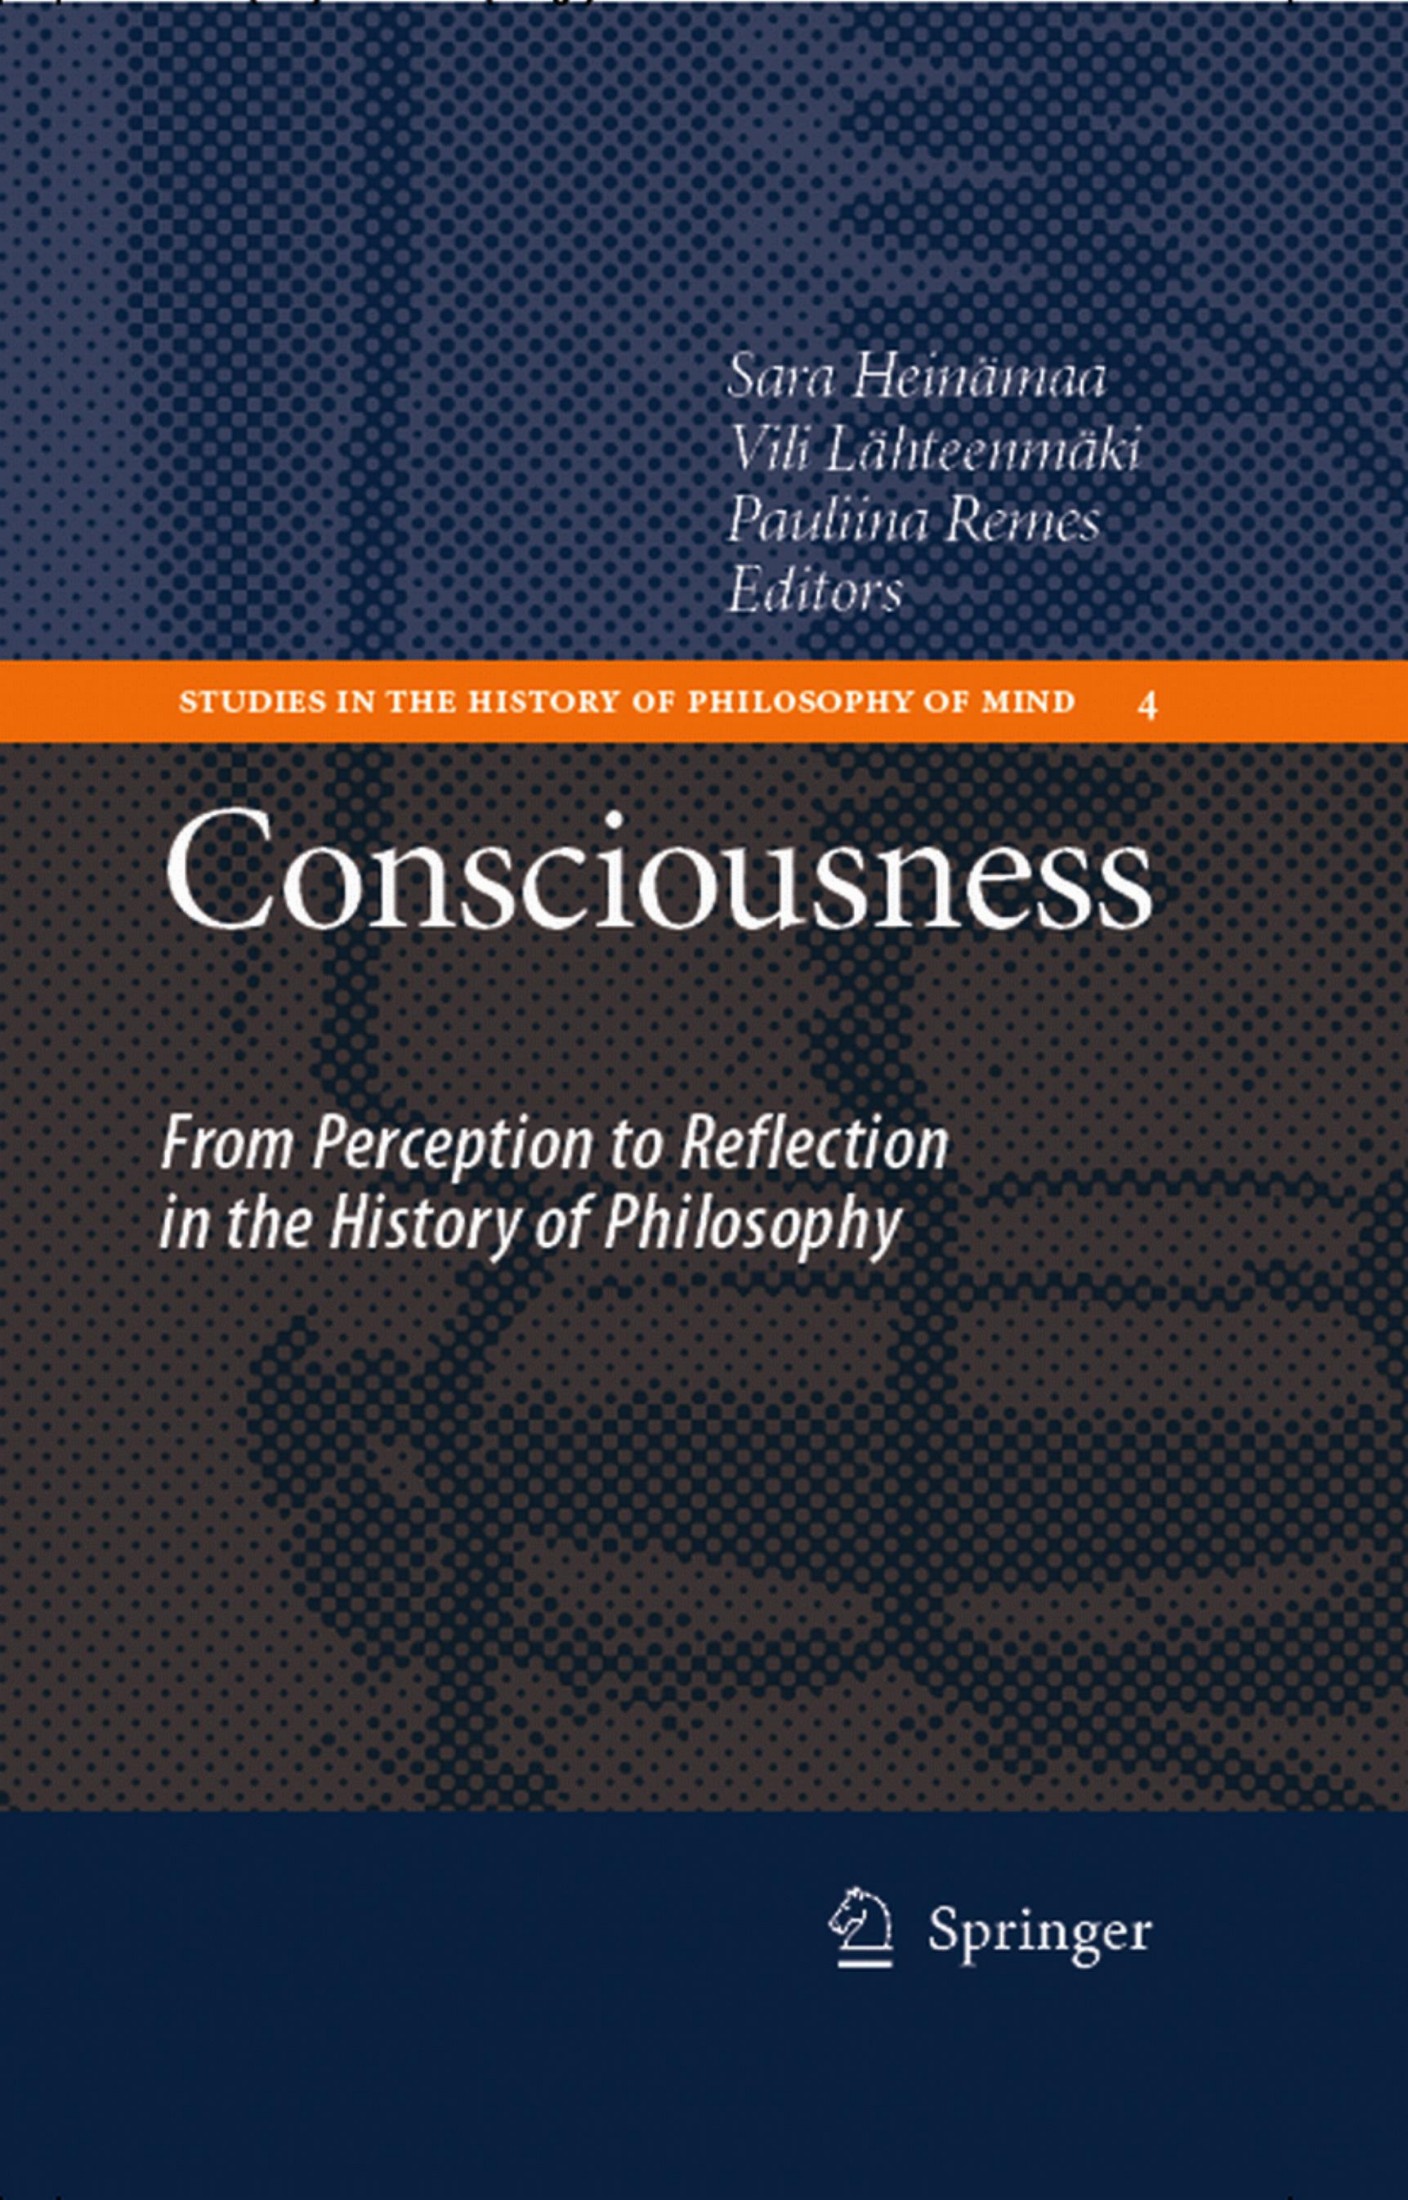 Consciousness: From Perception to Reflection in the History of Philosophy